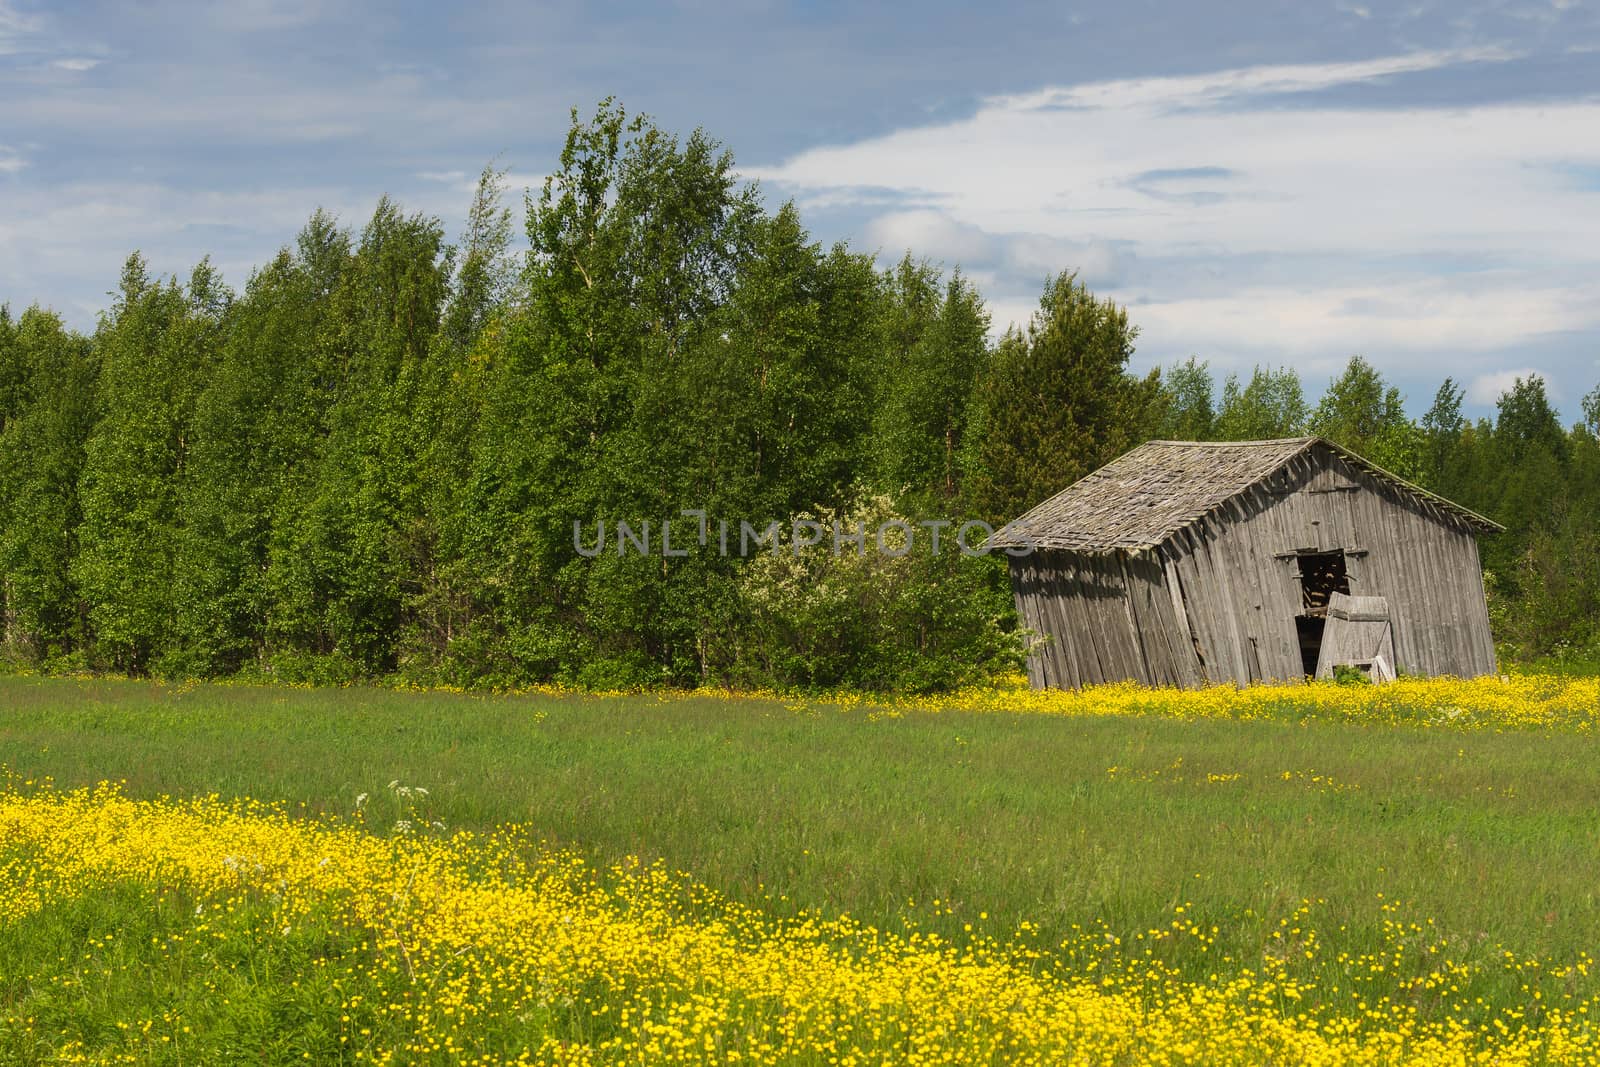 A ribbon of yellow flowers cuts through the green grass in front of the barn set against green trees under blue skies.